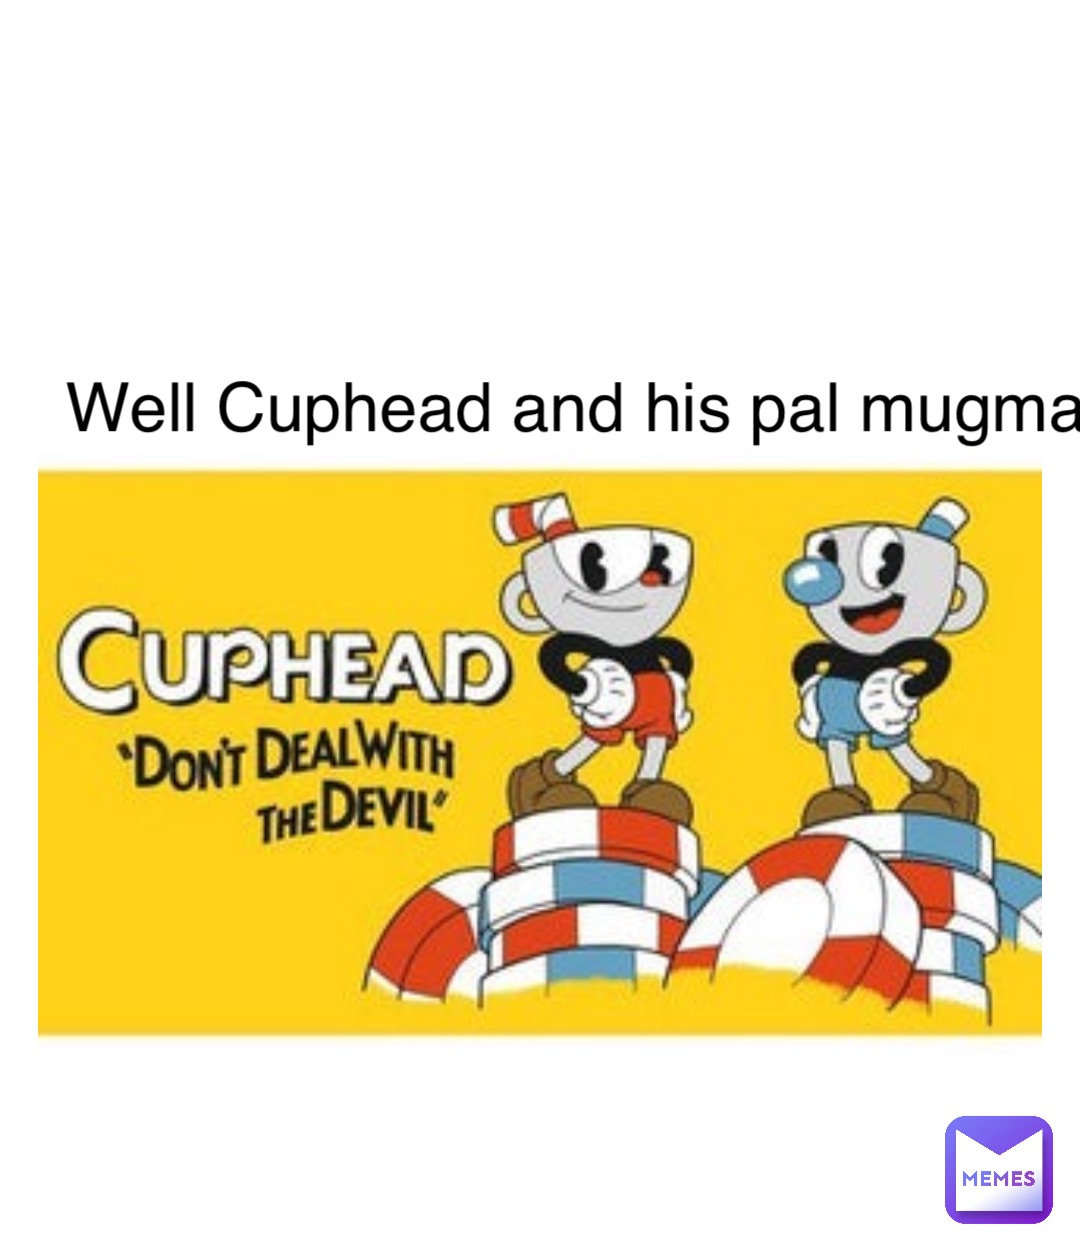 Double tap to edit Well Cuphead and his pal mugman